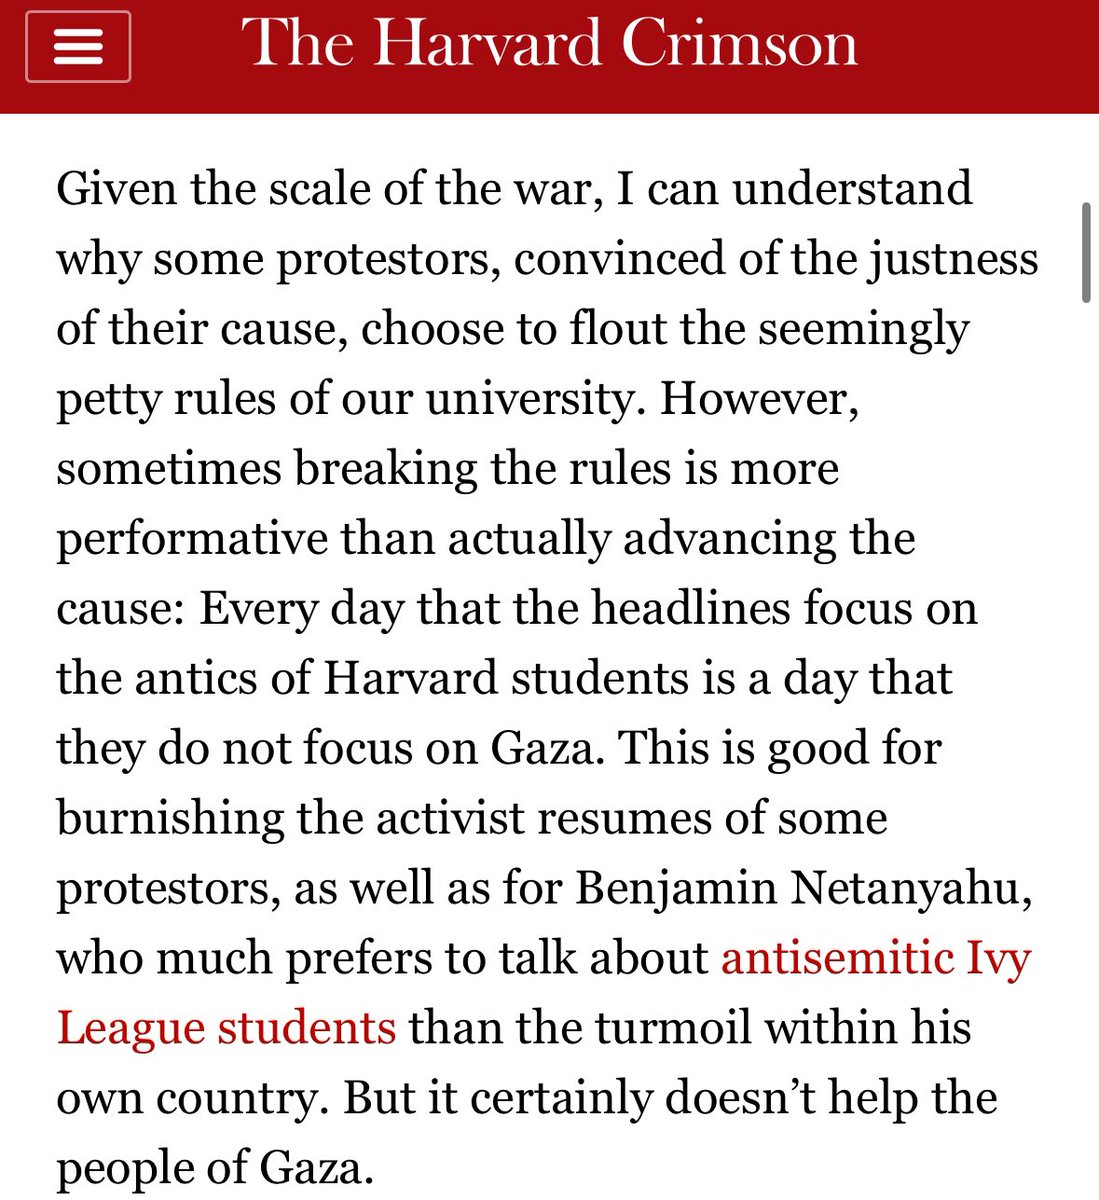 Great read from @boazbaraktcs addressing campus protests, it reminds us: academia must always lead in solving humanity's most pressing problems. Unfortunately these protests are more about performance than solutions #SolutionsNotShows'
thecrimson.com/column/council…